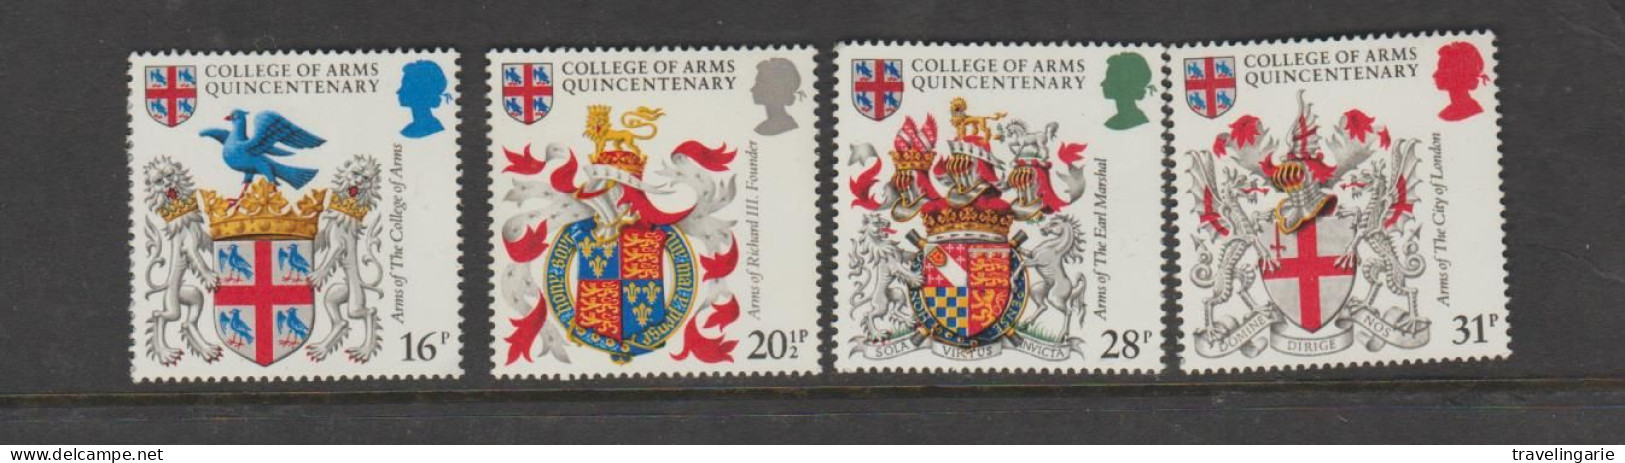 Great Britain 1984 500th Anniversary Of College Of Arms MNH ** - Ungebraucht